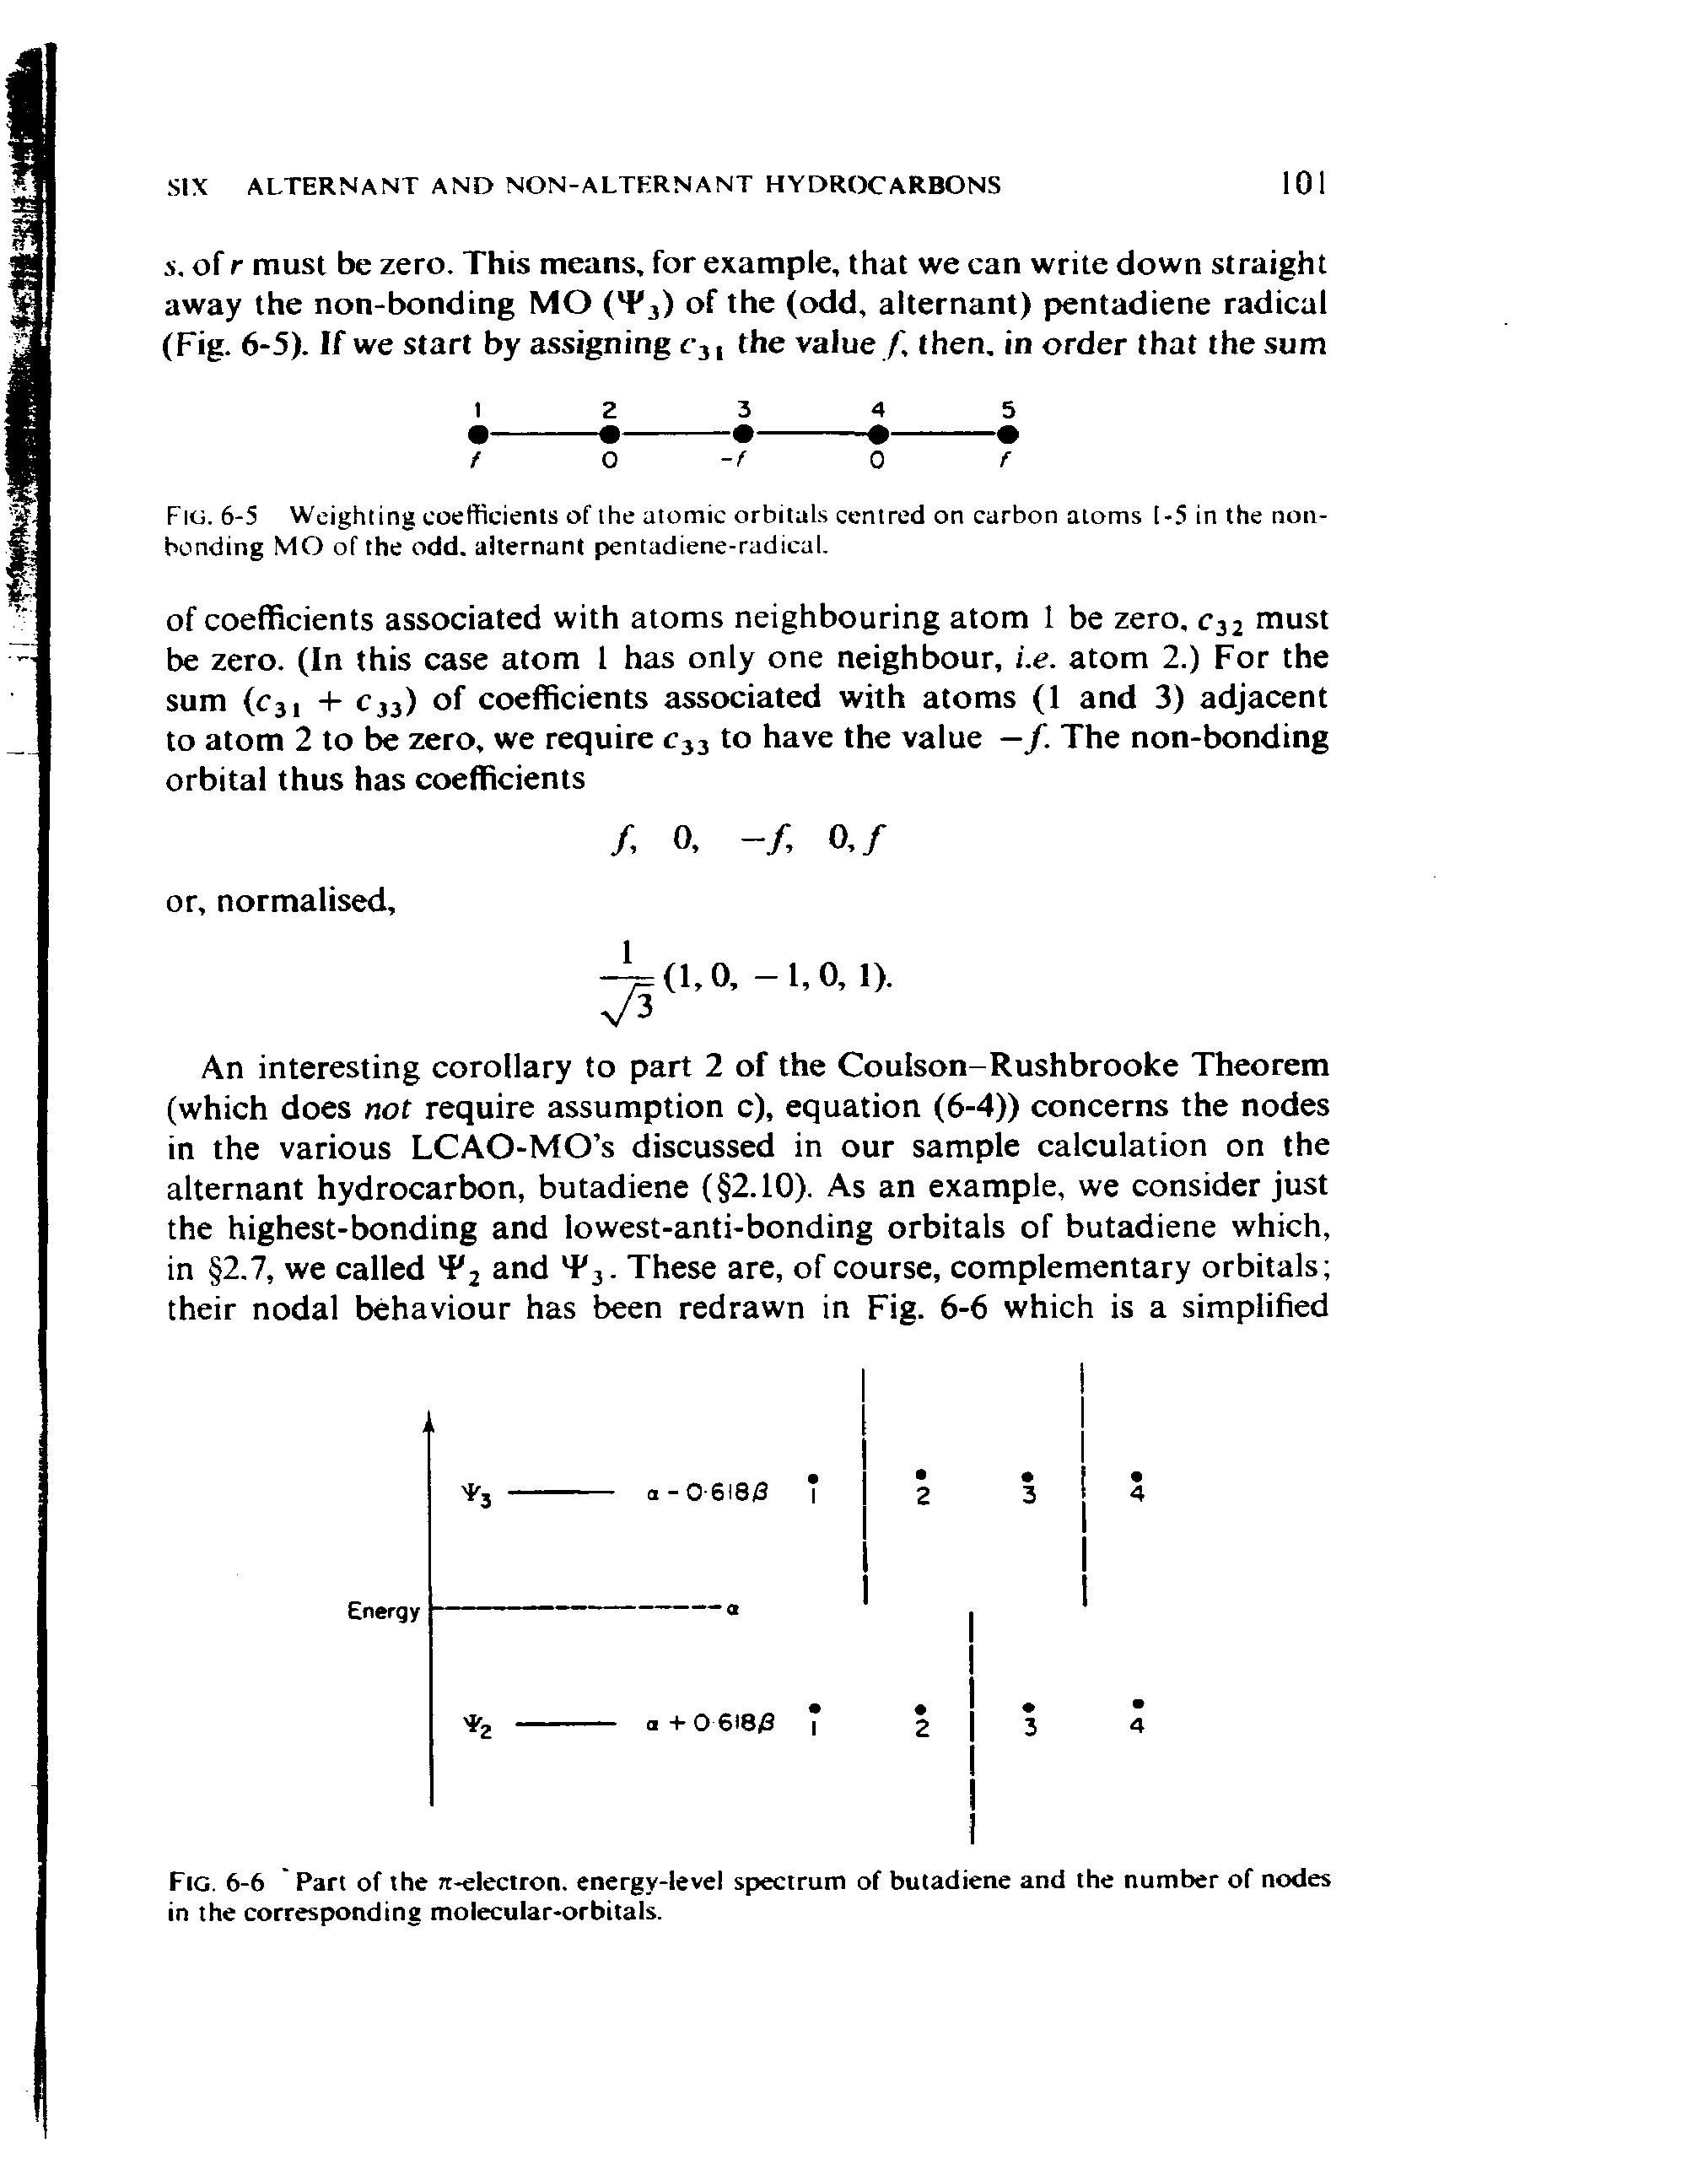 Fig. 6-5 Weighting coefficients of the atomic orbitals centred on carbon atoms [-5 in the non-bonding MO of the odd. alternant pentadiene-radical.